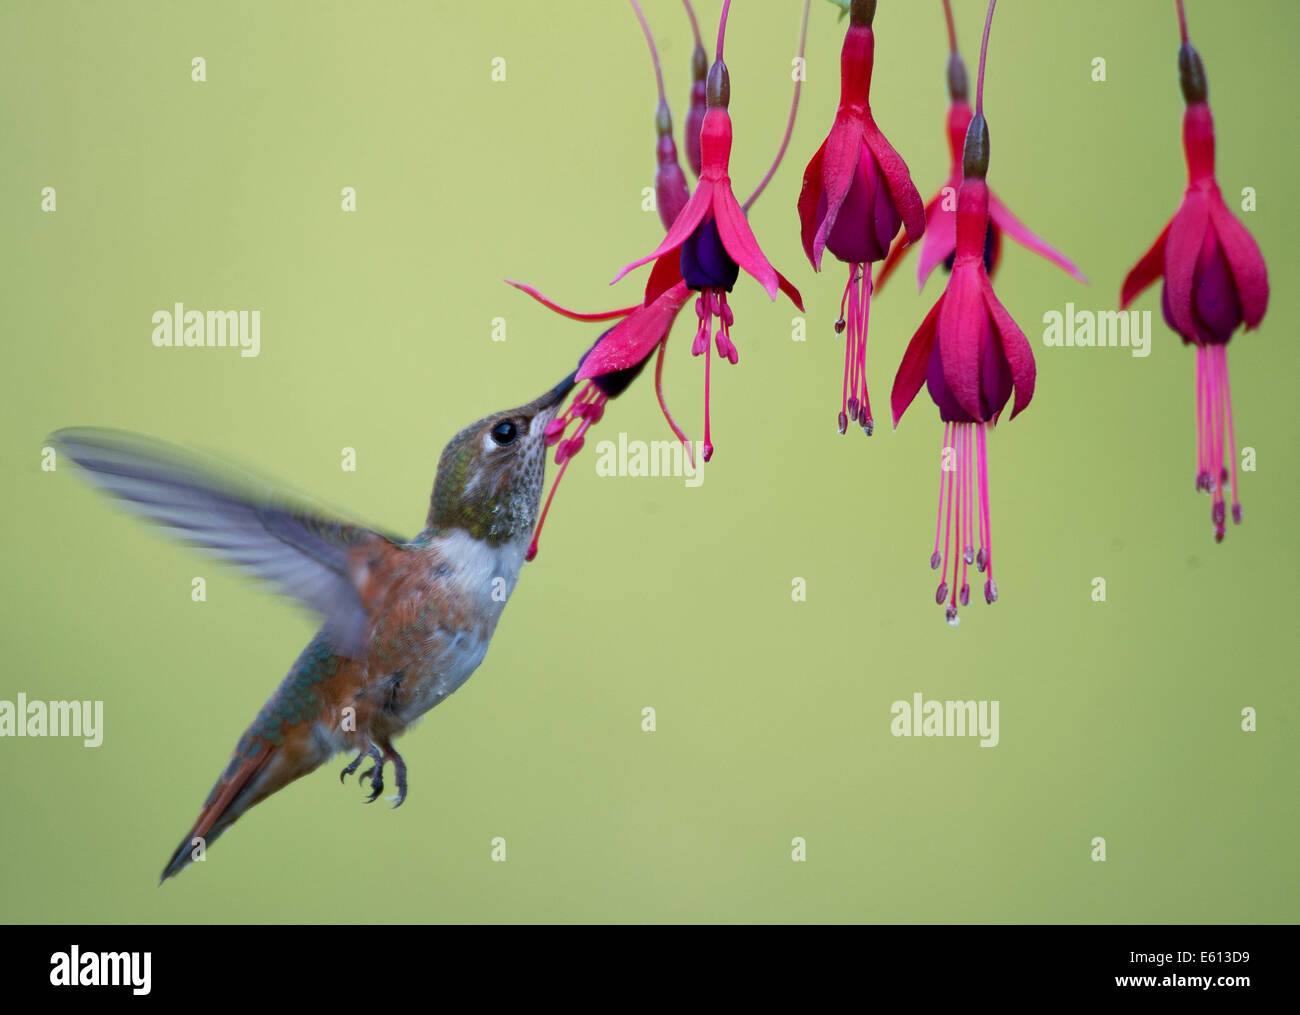 Elkton, Oregon, USA. 10th Aug, 2014. A rufous hummingbird feeds on fuchsia flowers outside a home near Elkton in southwestern Oregon. Some rufous hummingbirds migrate thousands of miles from their summer homes in the Pacific Northwest and the Rocky Mountain states to wintering grounds in Mexico. © Robin Loznak/ZUMA Wire/Alamy Live News Stock Photo